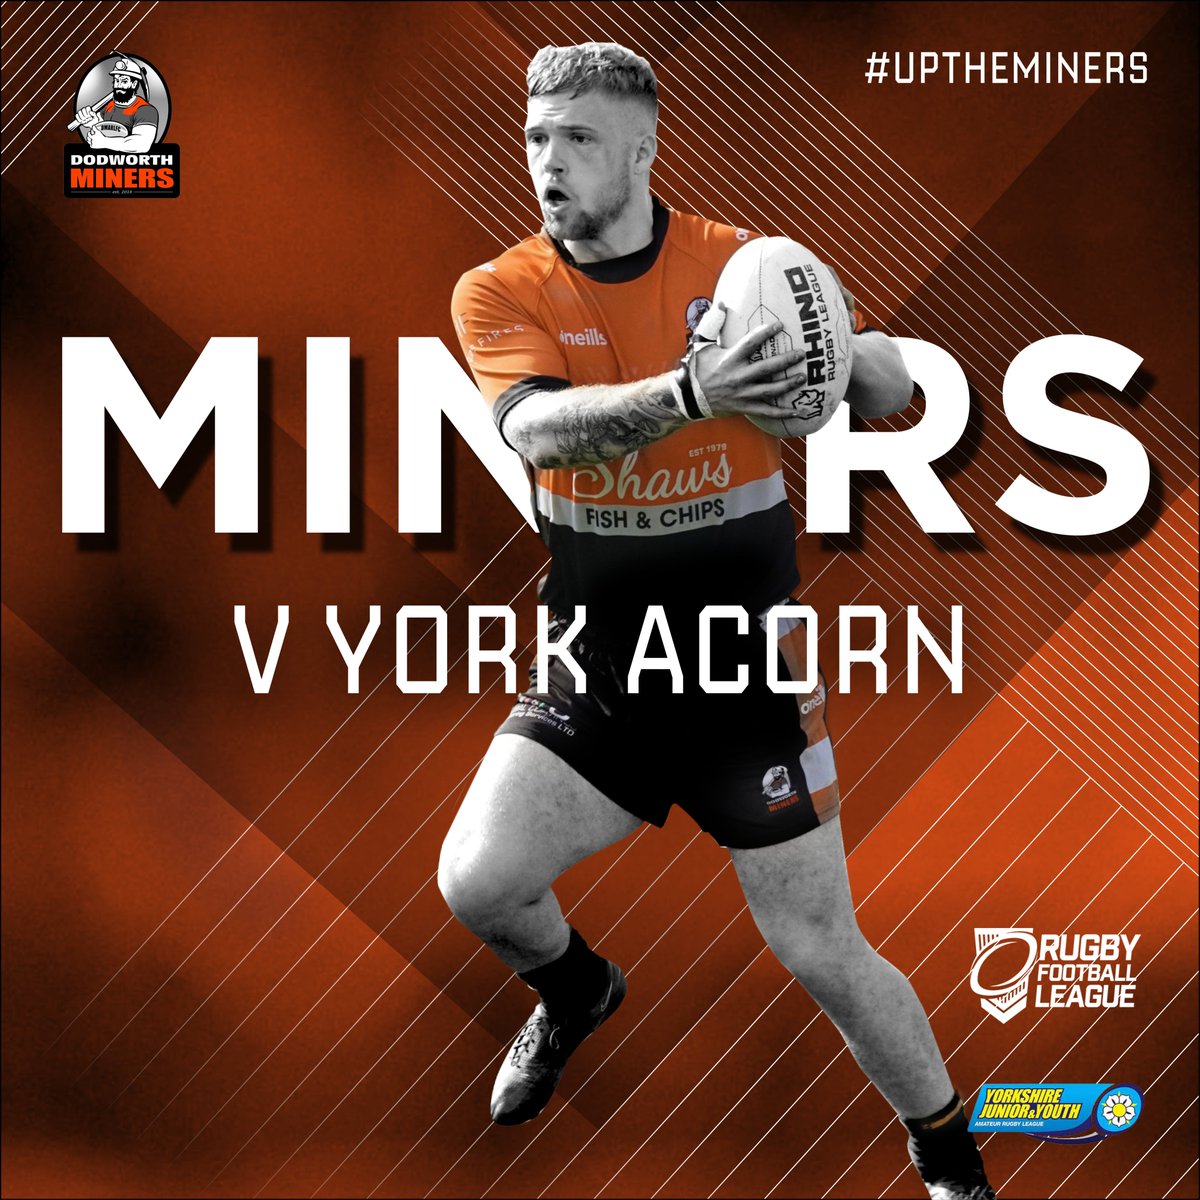 FRIDAY NIGHT FOOTY!!! We welcome York Acorn to the welfare for a Friday evening game! The Tappers Bar will be open for the the drinks!! 7pm kick off - See you there!! #dodworth #rugbyleague #UpTheMiners #york #SouthYorkshireRugby #SuperLeague #barnsleyisbrill #barnsley